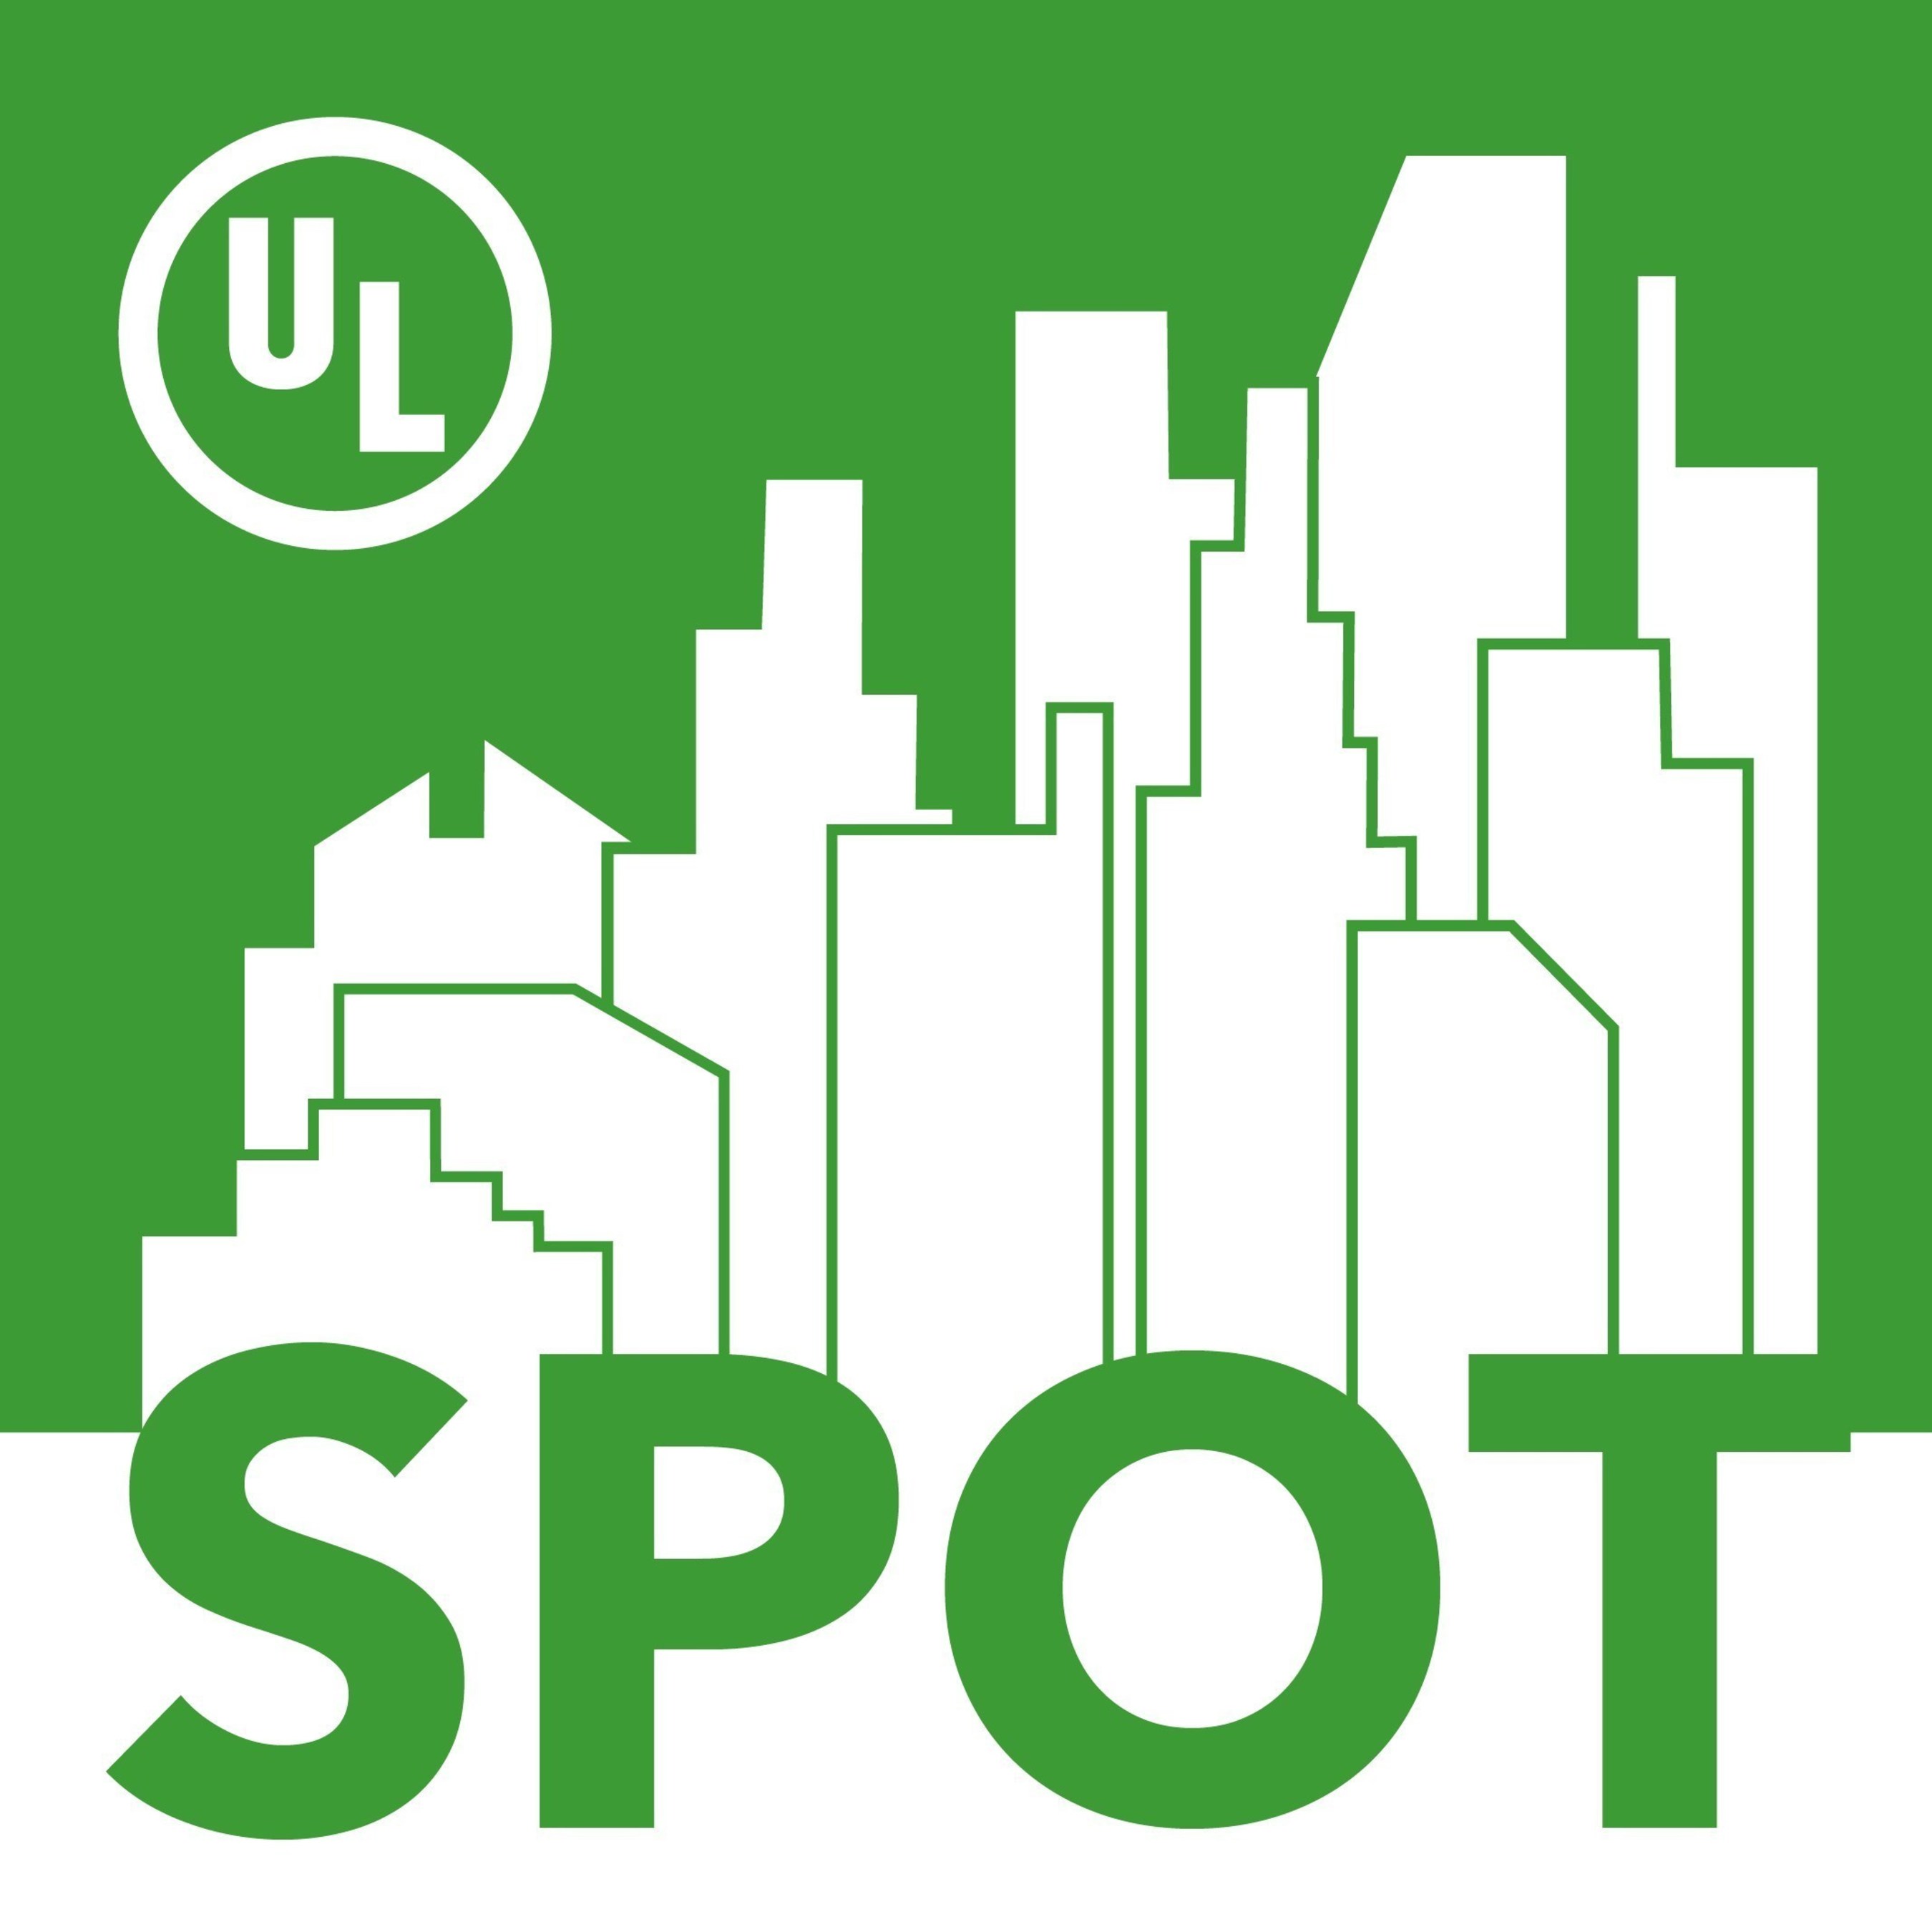 UL.COM/SPOT is a web-based product sustainability information tool that will facilitate the selection of credible green products and enable the design community to apply that information into the Building Information Modeling (BIM) workflow. Currently featuring more than 40,000 products, SPOT database will be a first of its kind tool for architects, designers and specifiers to identify products by sustainable attributes, MasterFormat product codes and building rating system credits such as LEED v4 and...